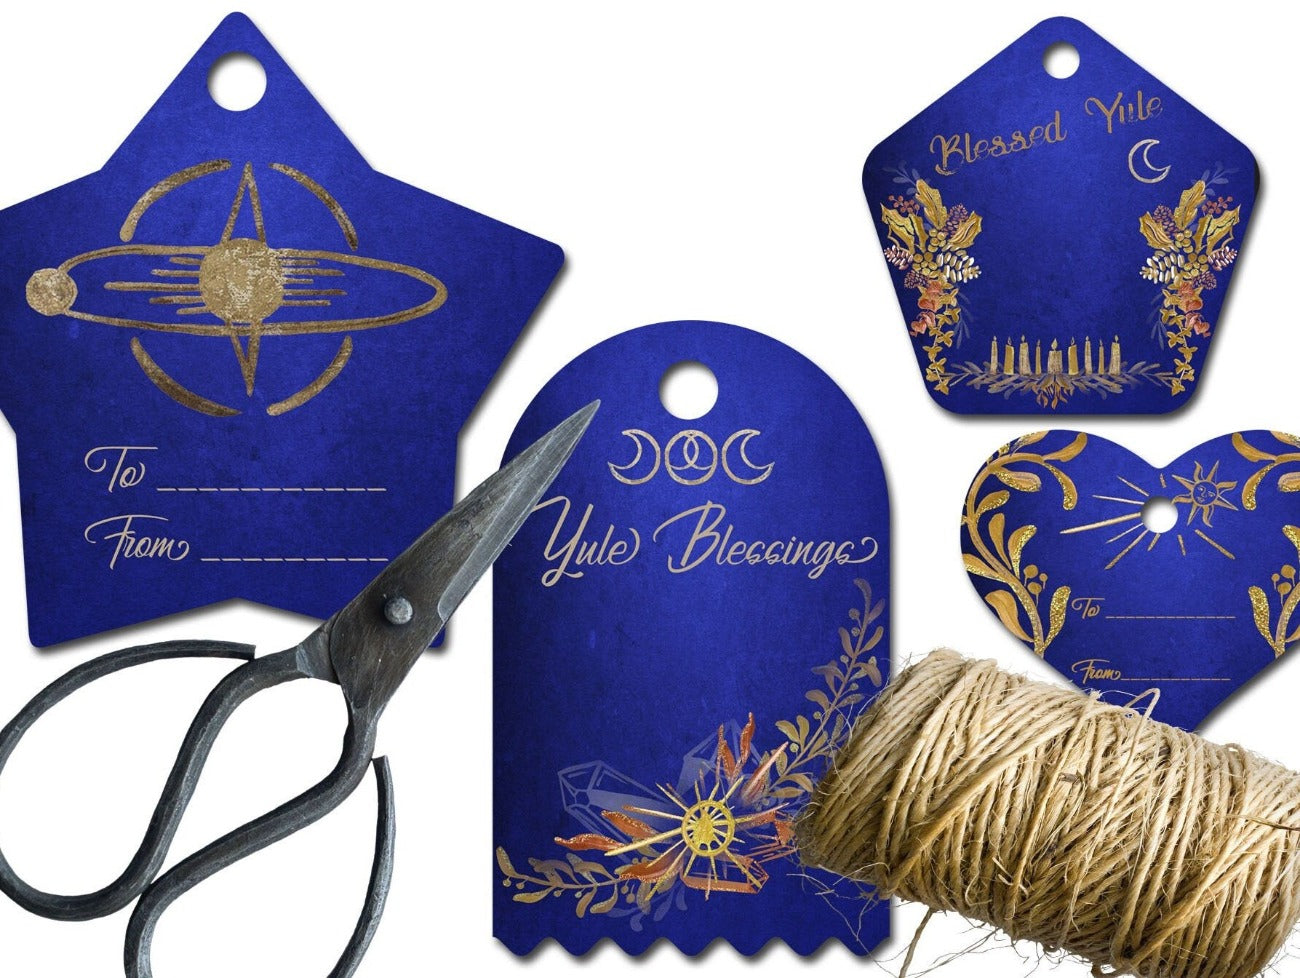 Three YULE Gift Tags placed with twine and scissors - Morgana Magick Spell